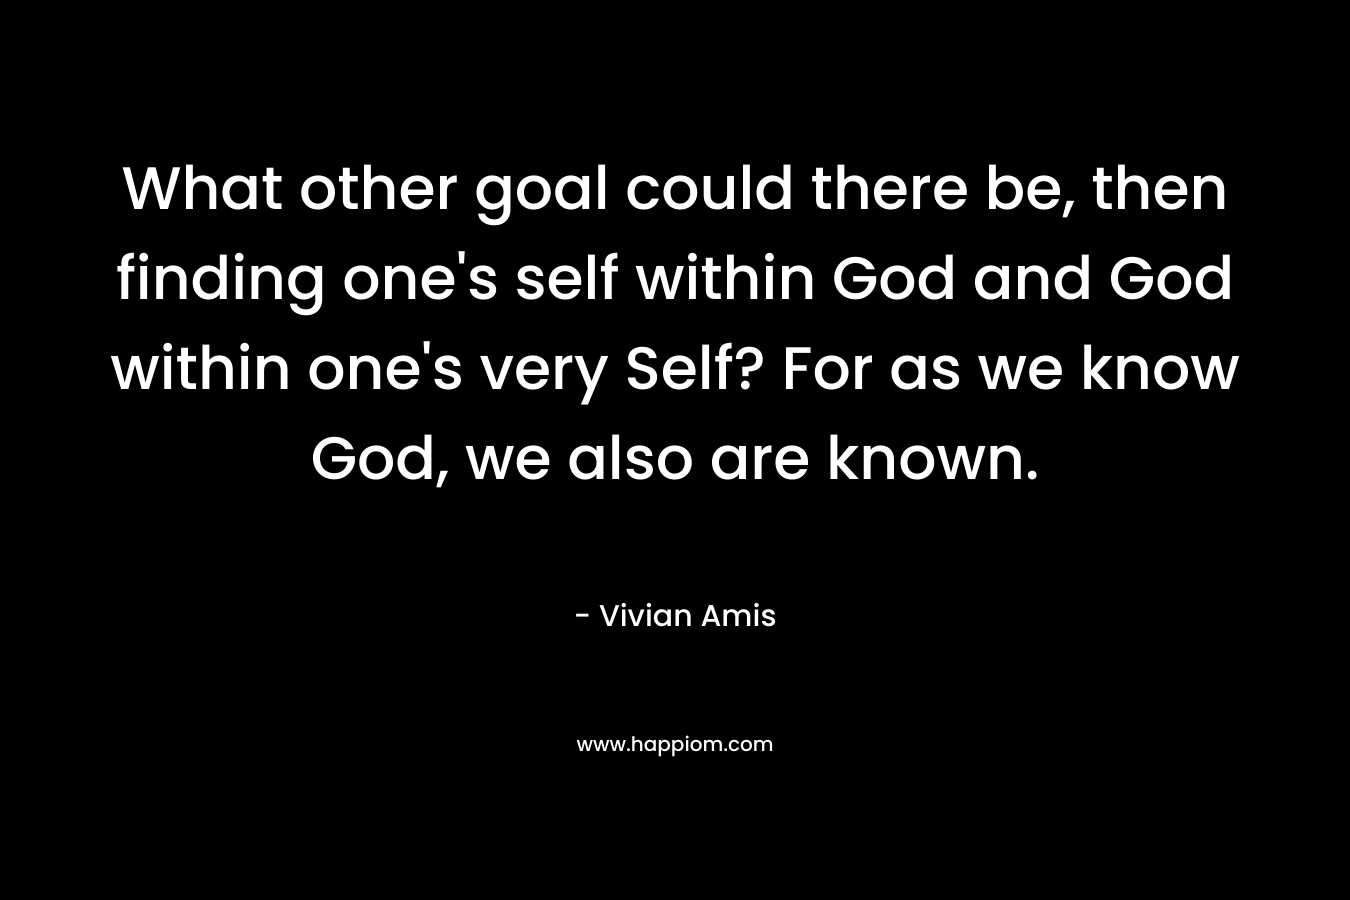 What other goal could there be, then finding one’s self within God and God within one’s very Self? For as we know God, we also are known. – Vivian Amis